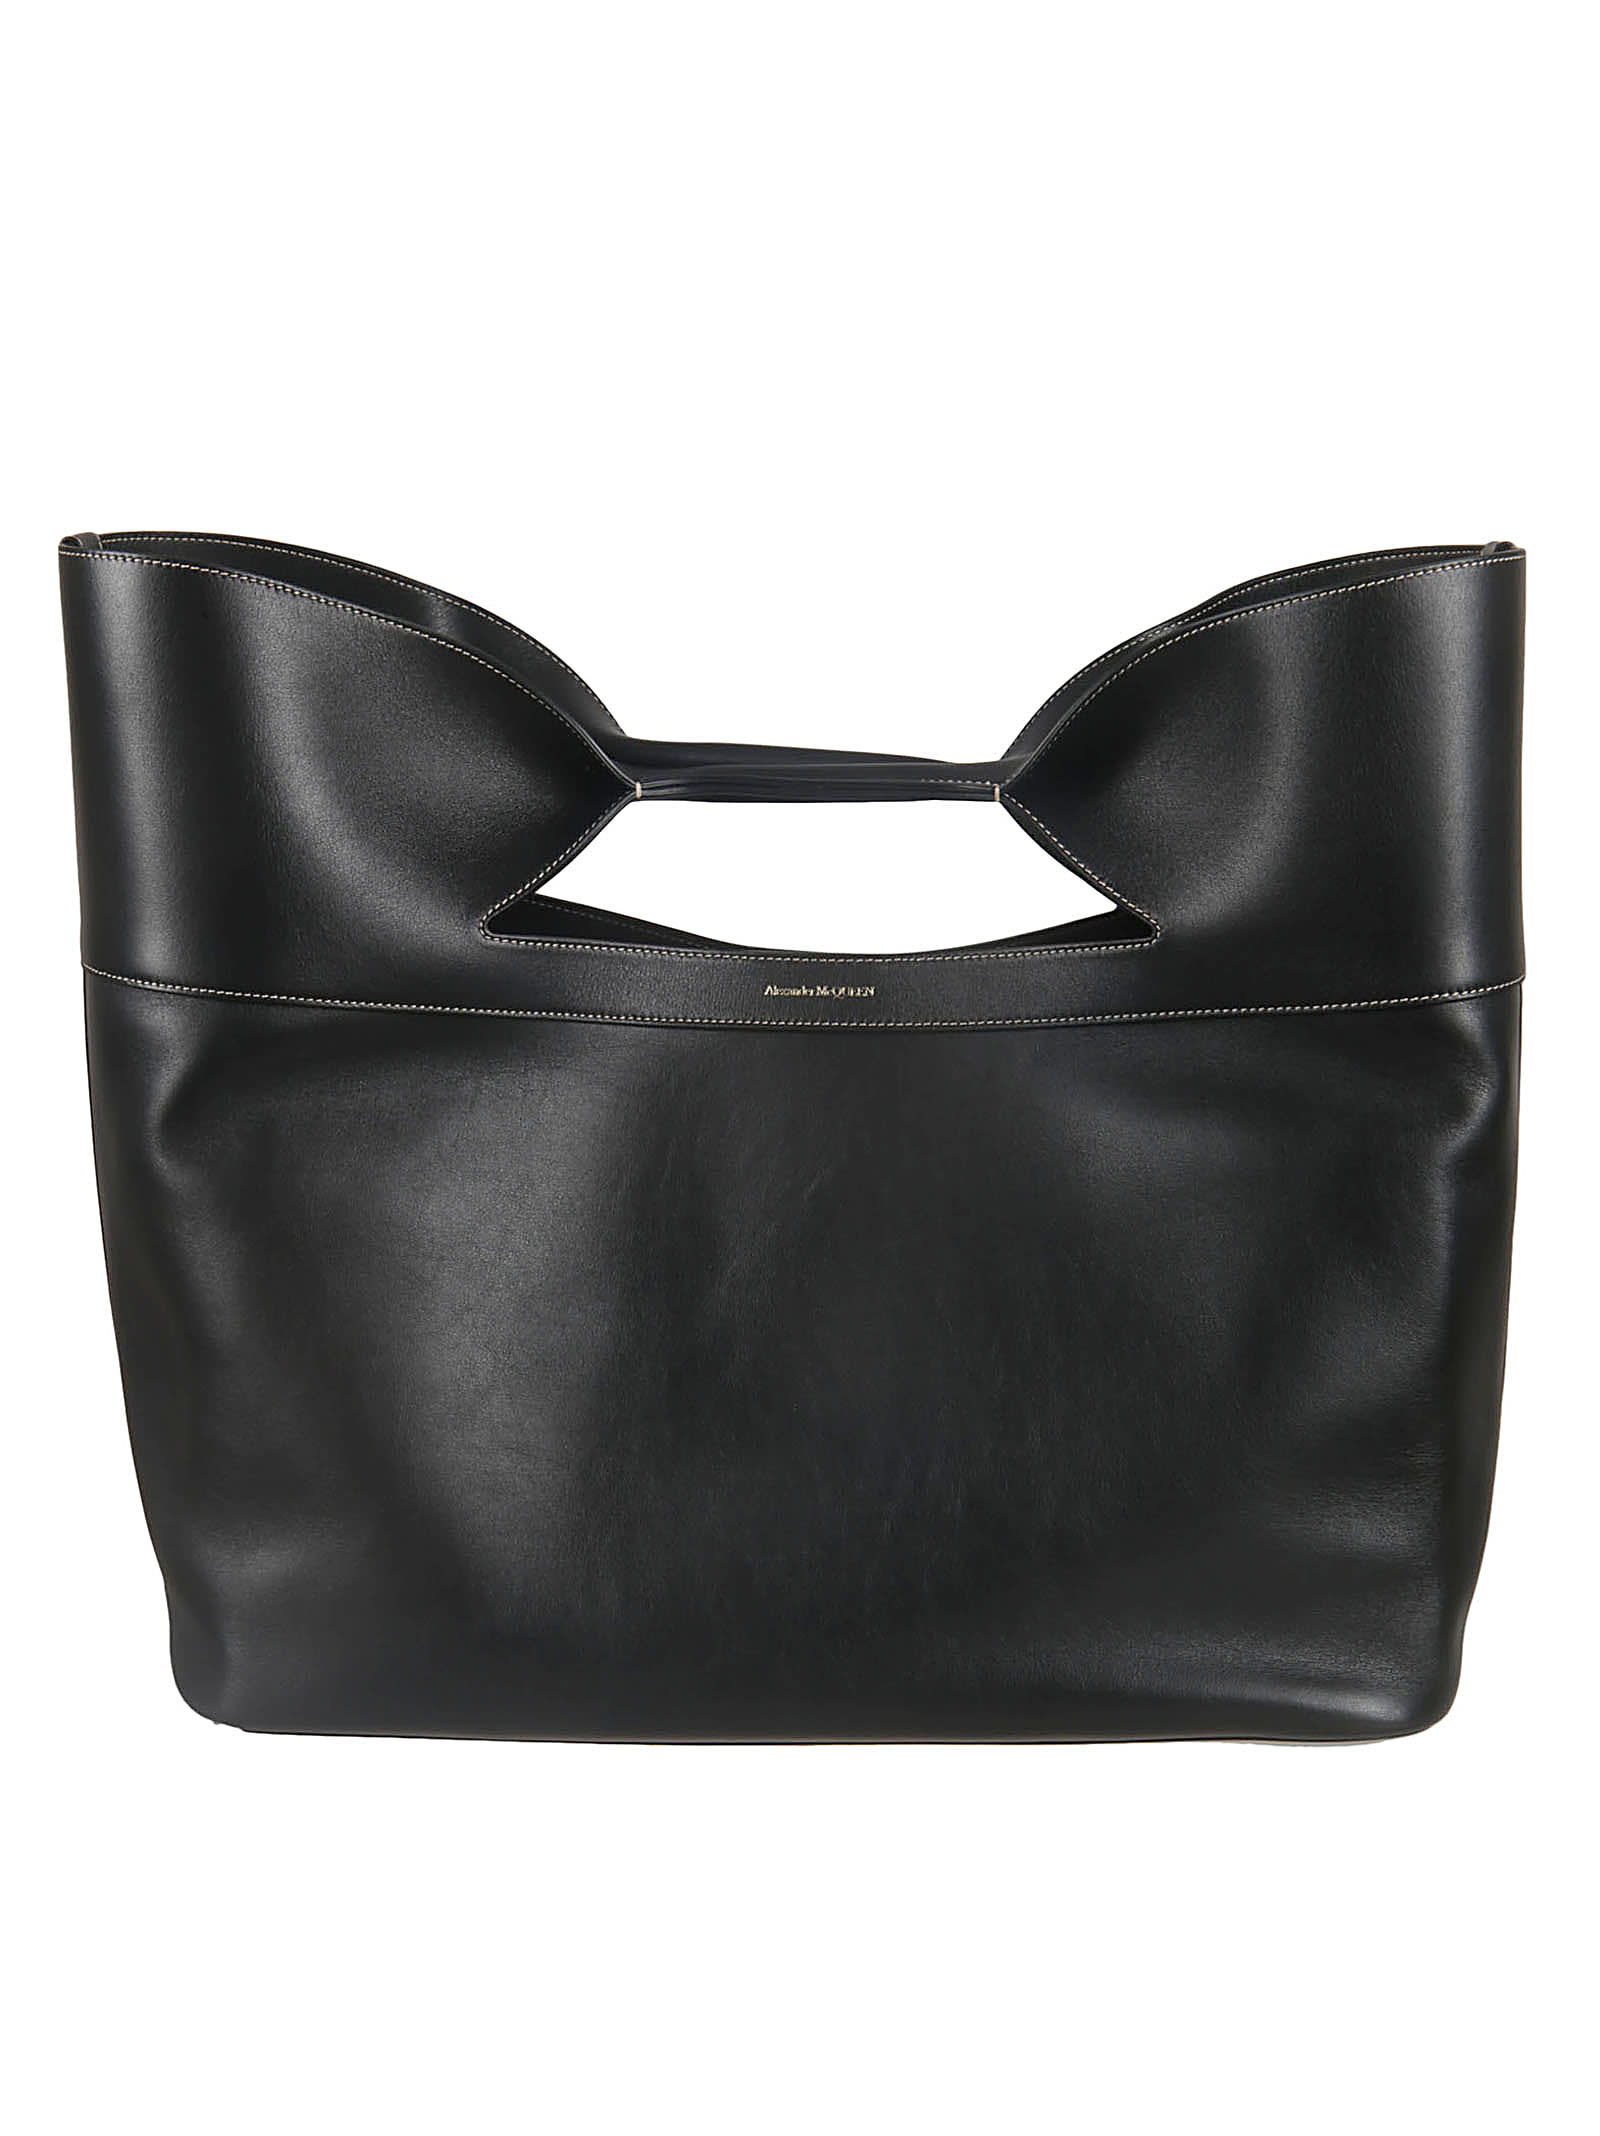 Alexander McQueen The Bow Large Hand Bag